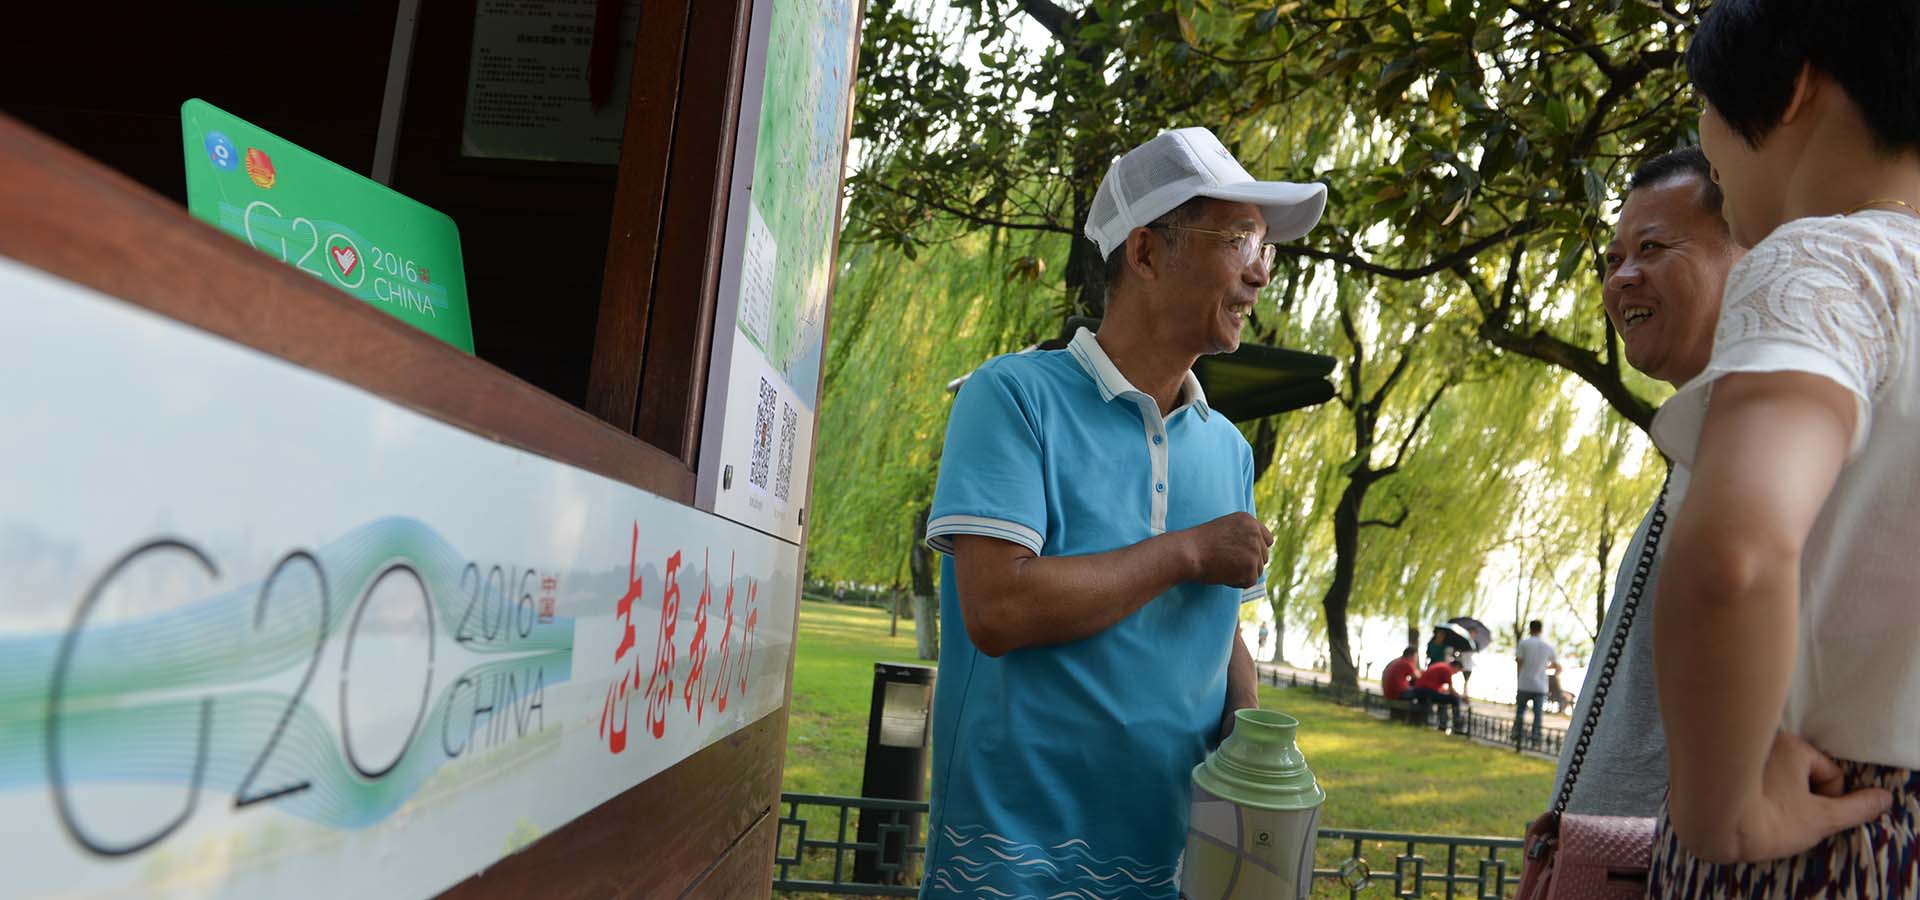 Pic story: 64-year-old volunteer serves tourists before G20 summit